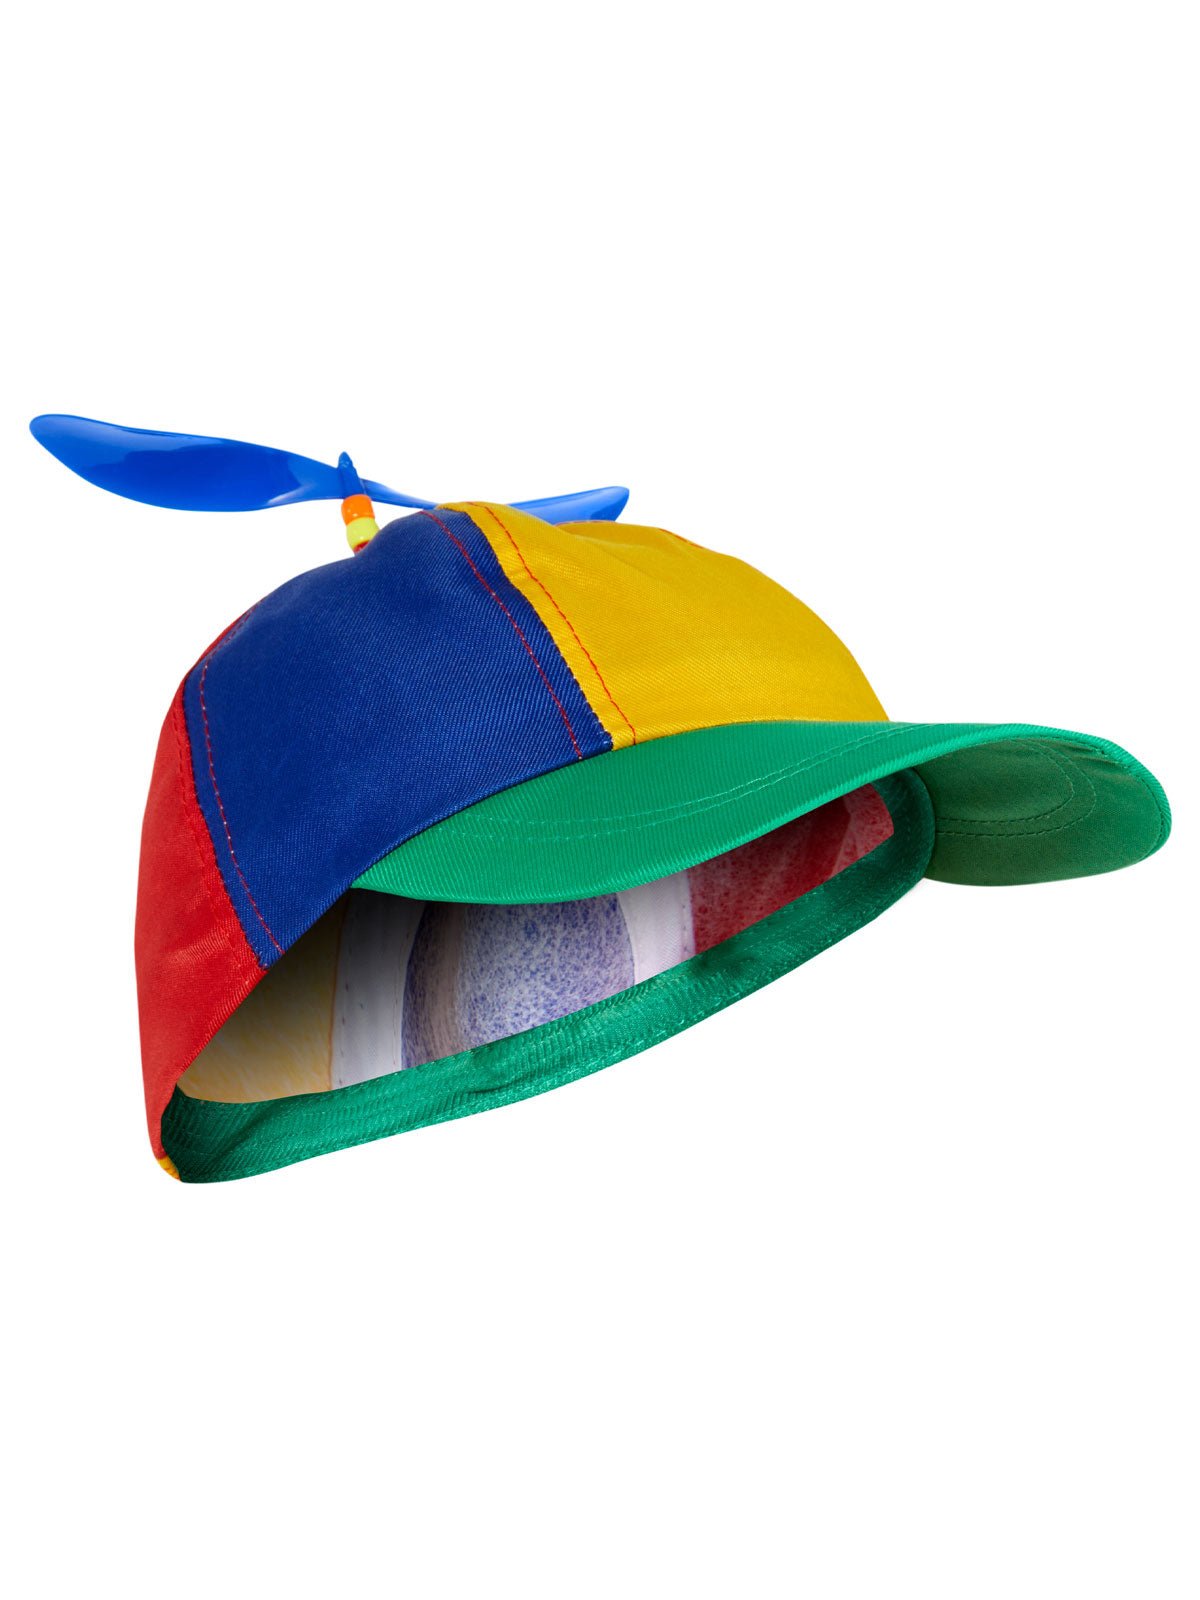 Fun hat with Propeller